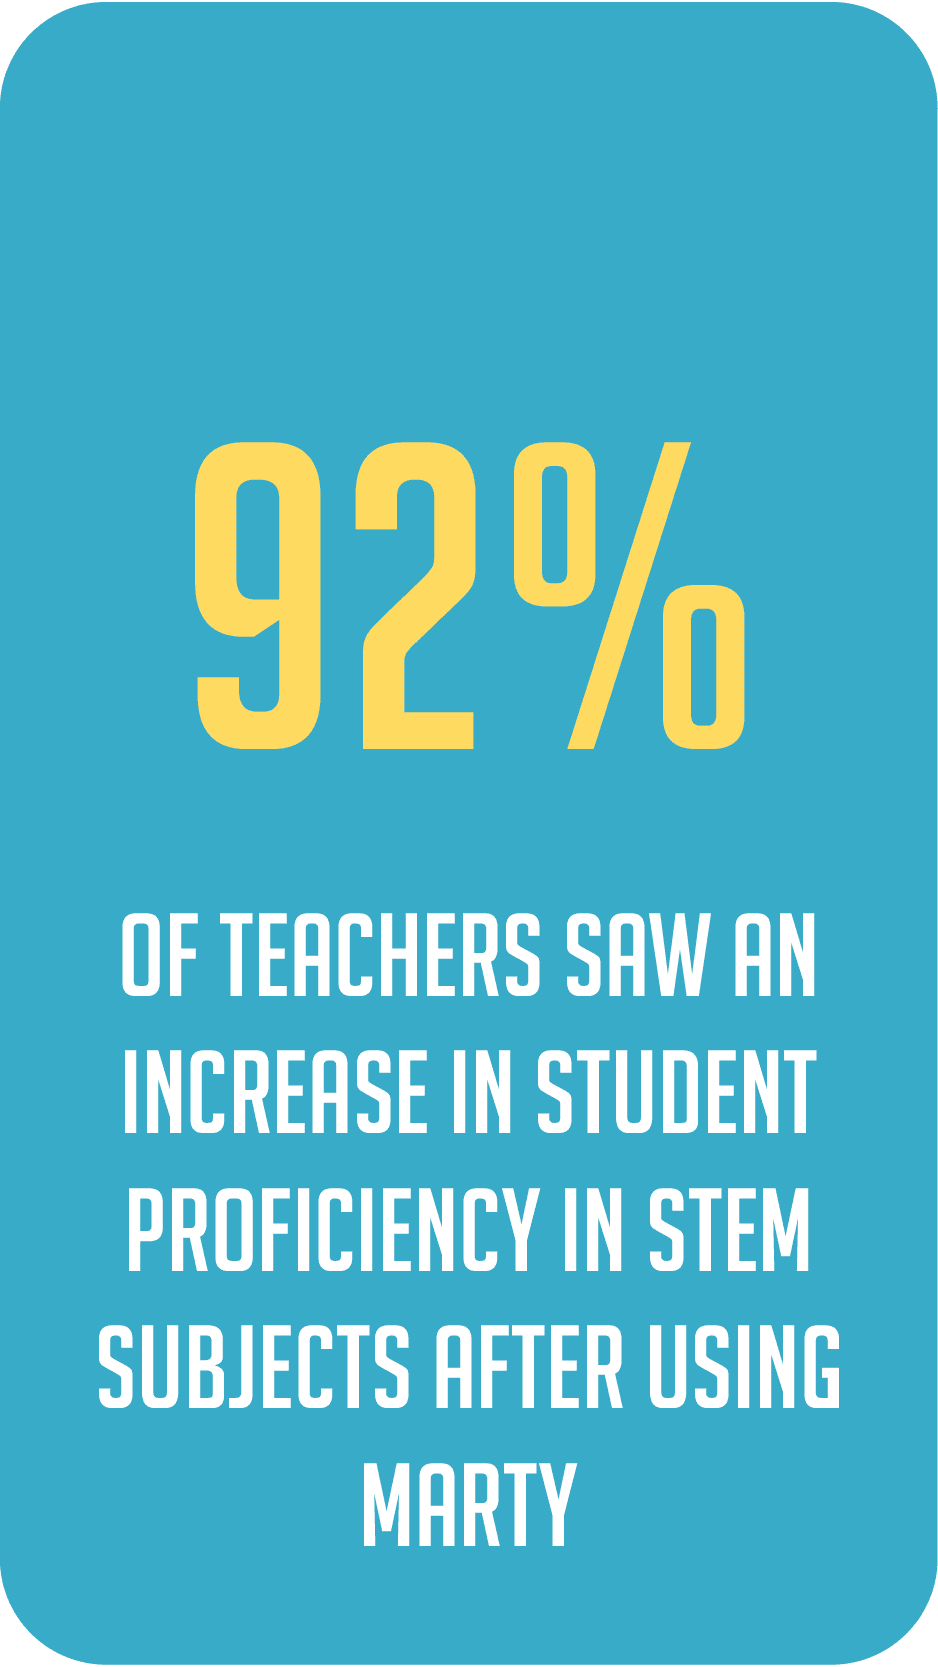 92% of teachers saw and increase in student proficiency in STEM subjects after using Marty.